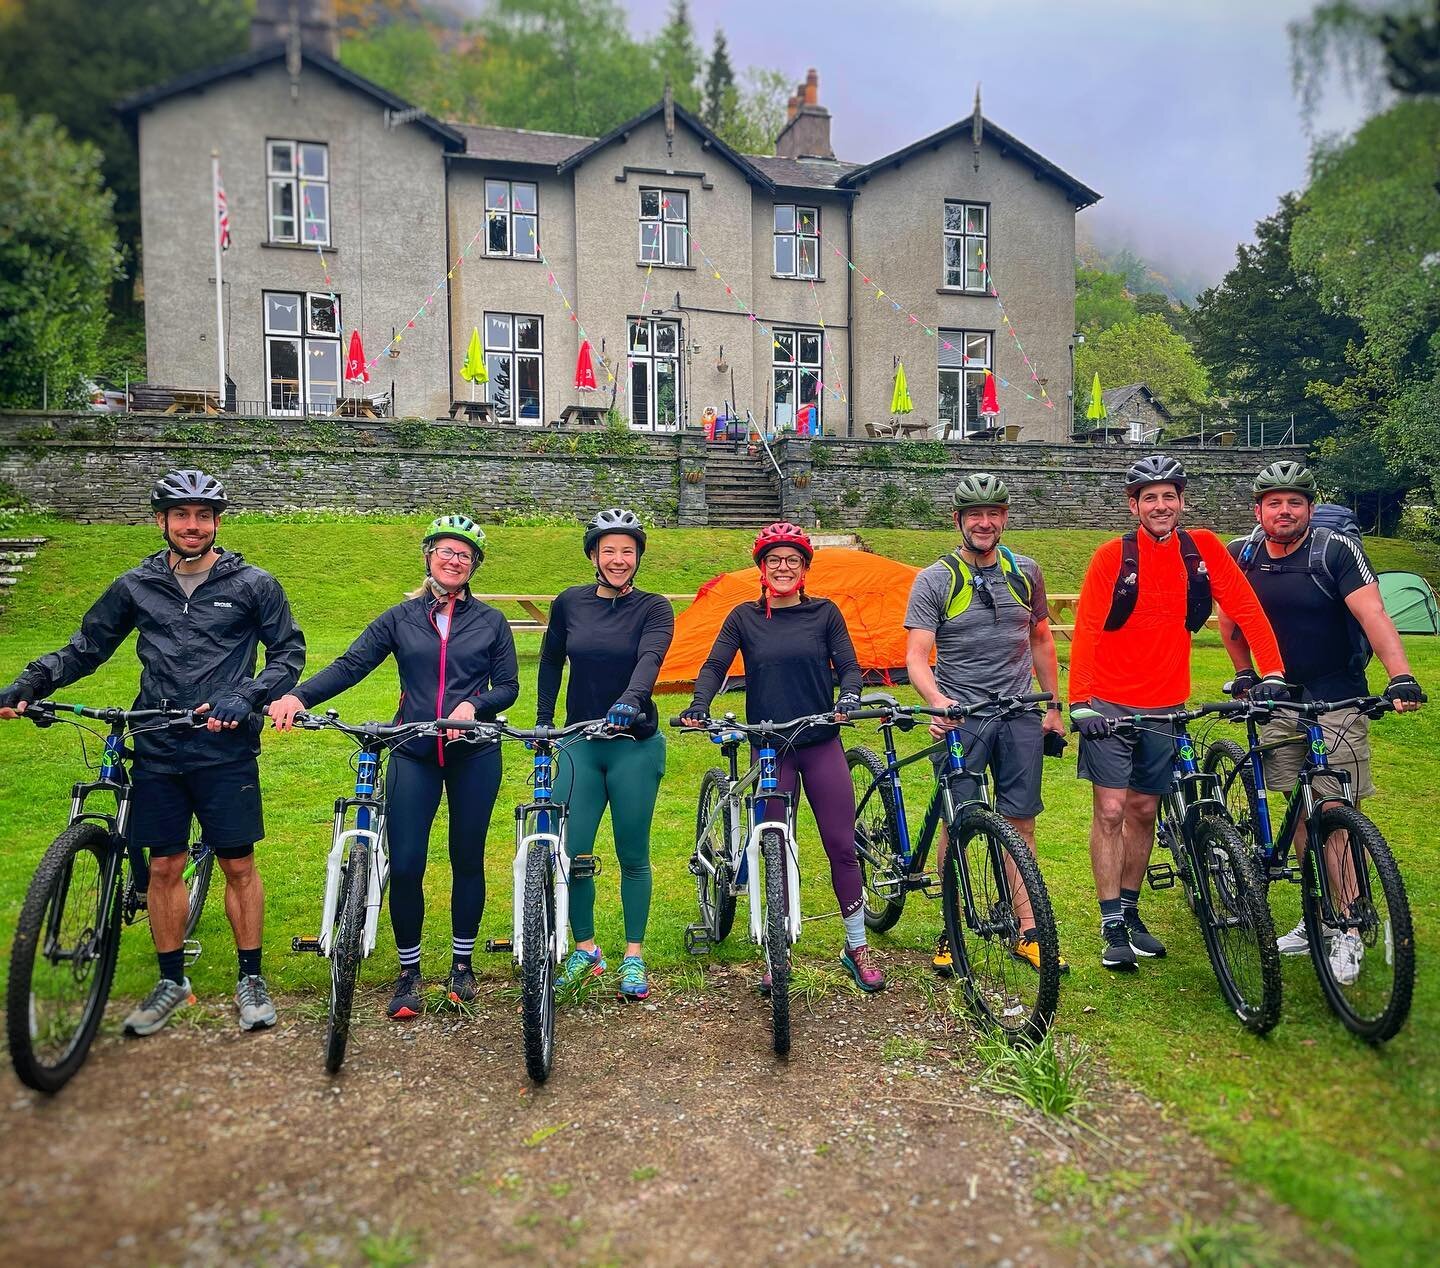 The Lake District Triple Challenge is complete 🎉

As many of you know this year Rosie and I along with some of our amazing FIT family (Jean, Shanners, Steve D, Dan &amp; Chris) set out to tackle two challenges to help raise funds for @evelinalondonc